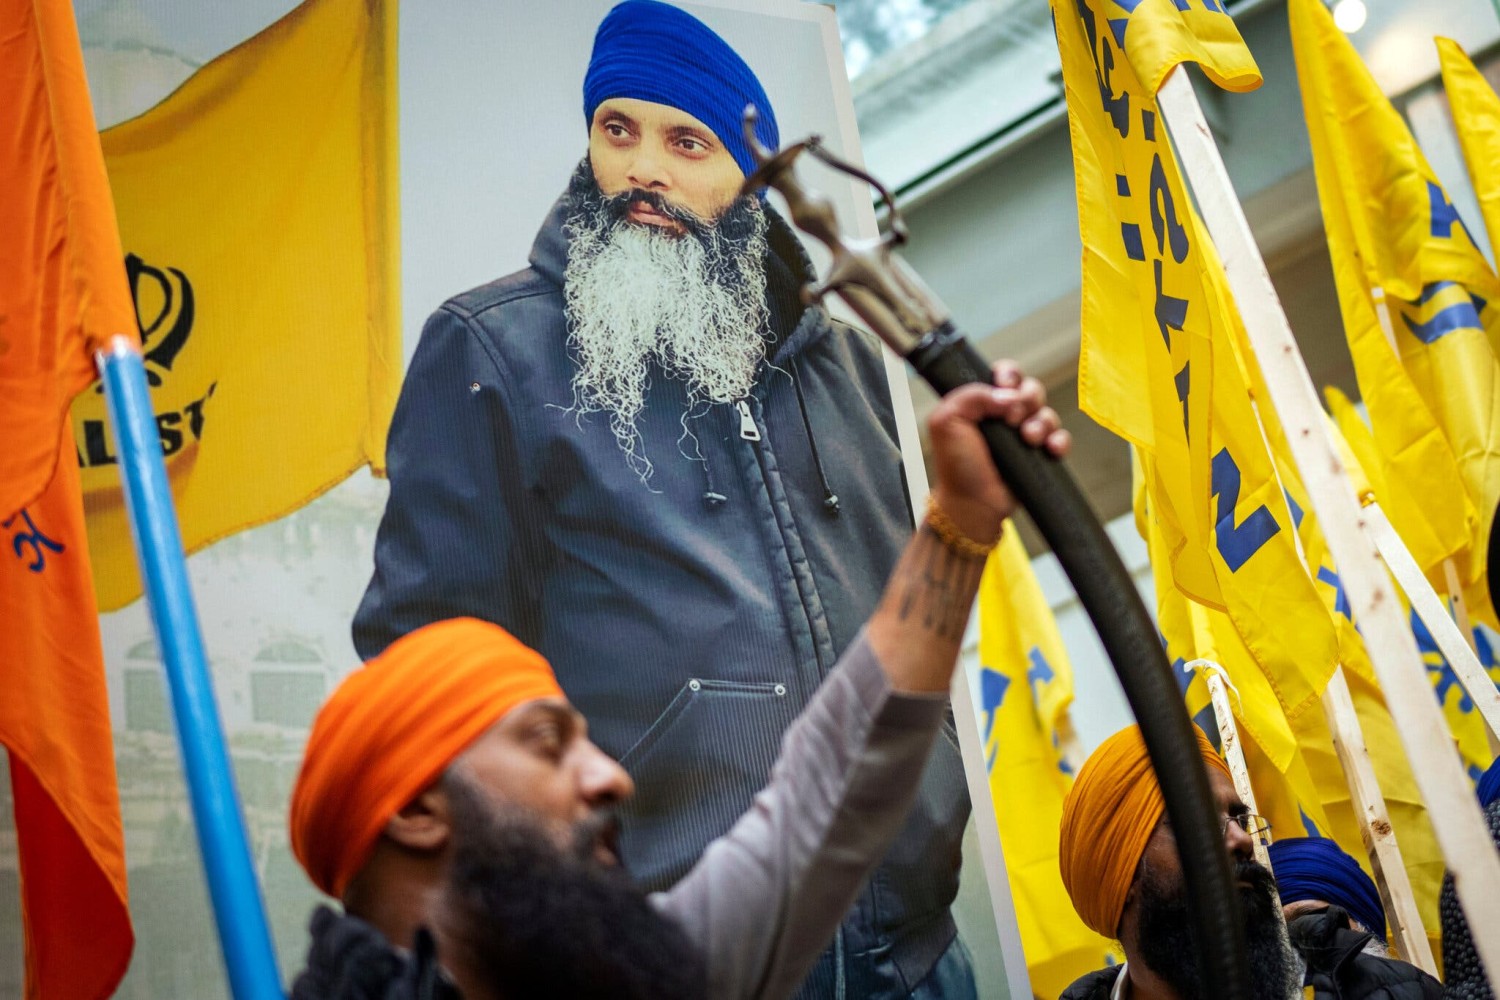 Demonstrators outside the Consulate General of India in Vancouver after the shooting of Hardeep Singh Nijjar, a Sikh separatist leader, in June. Credit...Ethan Cairns/The Canadian Press, via Associated Press